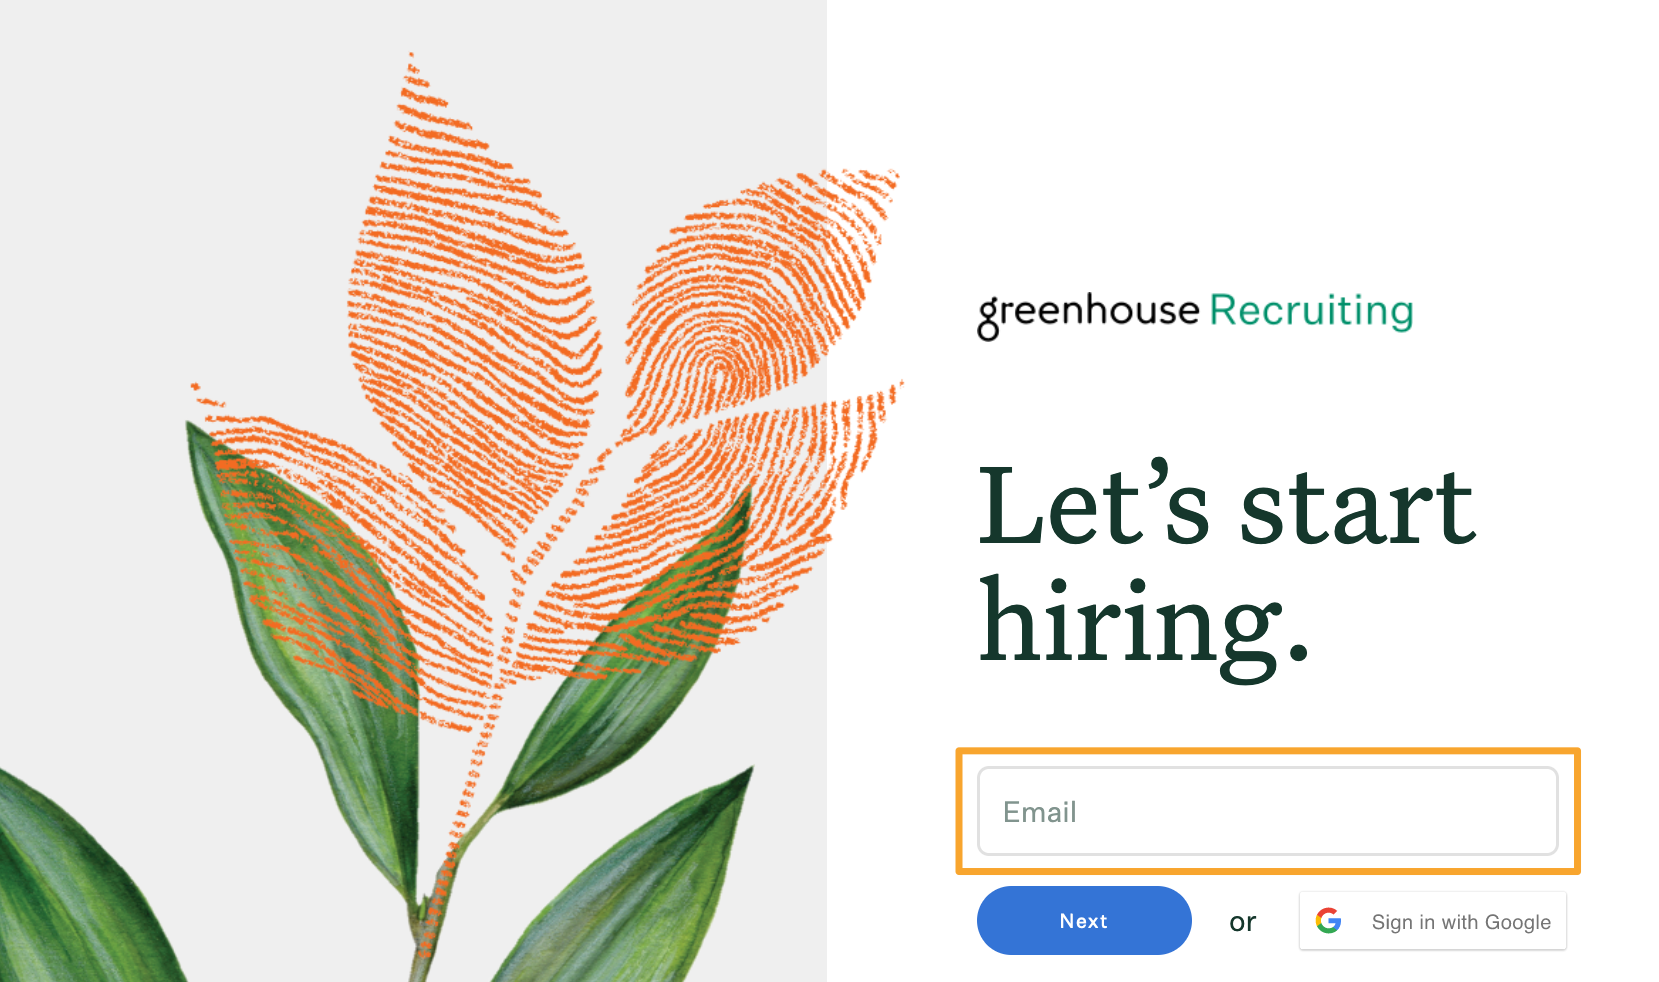 The Greenhouse Recruiting login page shows as large plant motif and the words Let's start hiring, followed by a field for the login email address